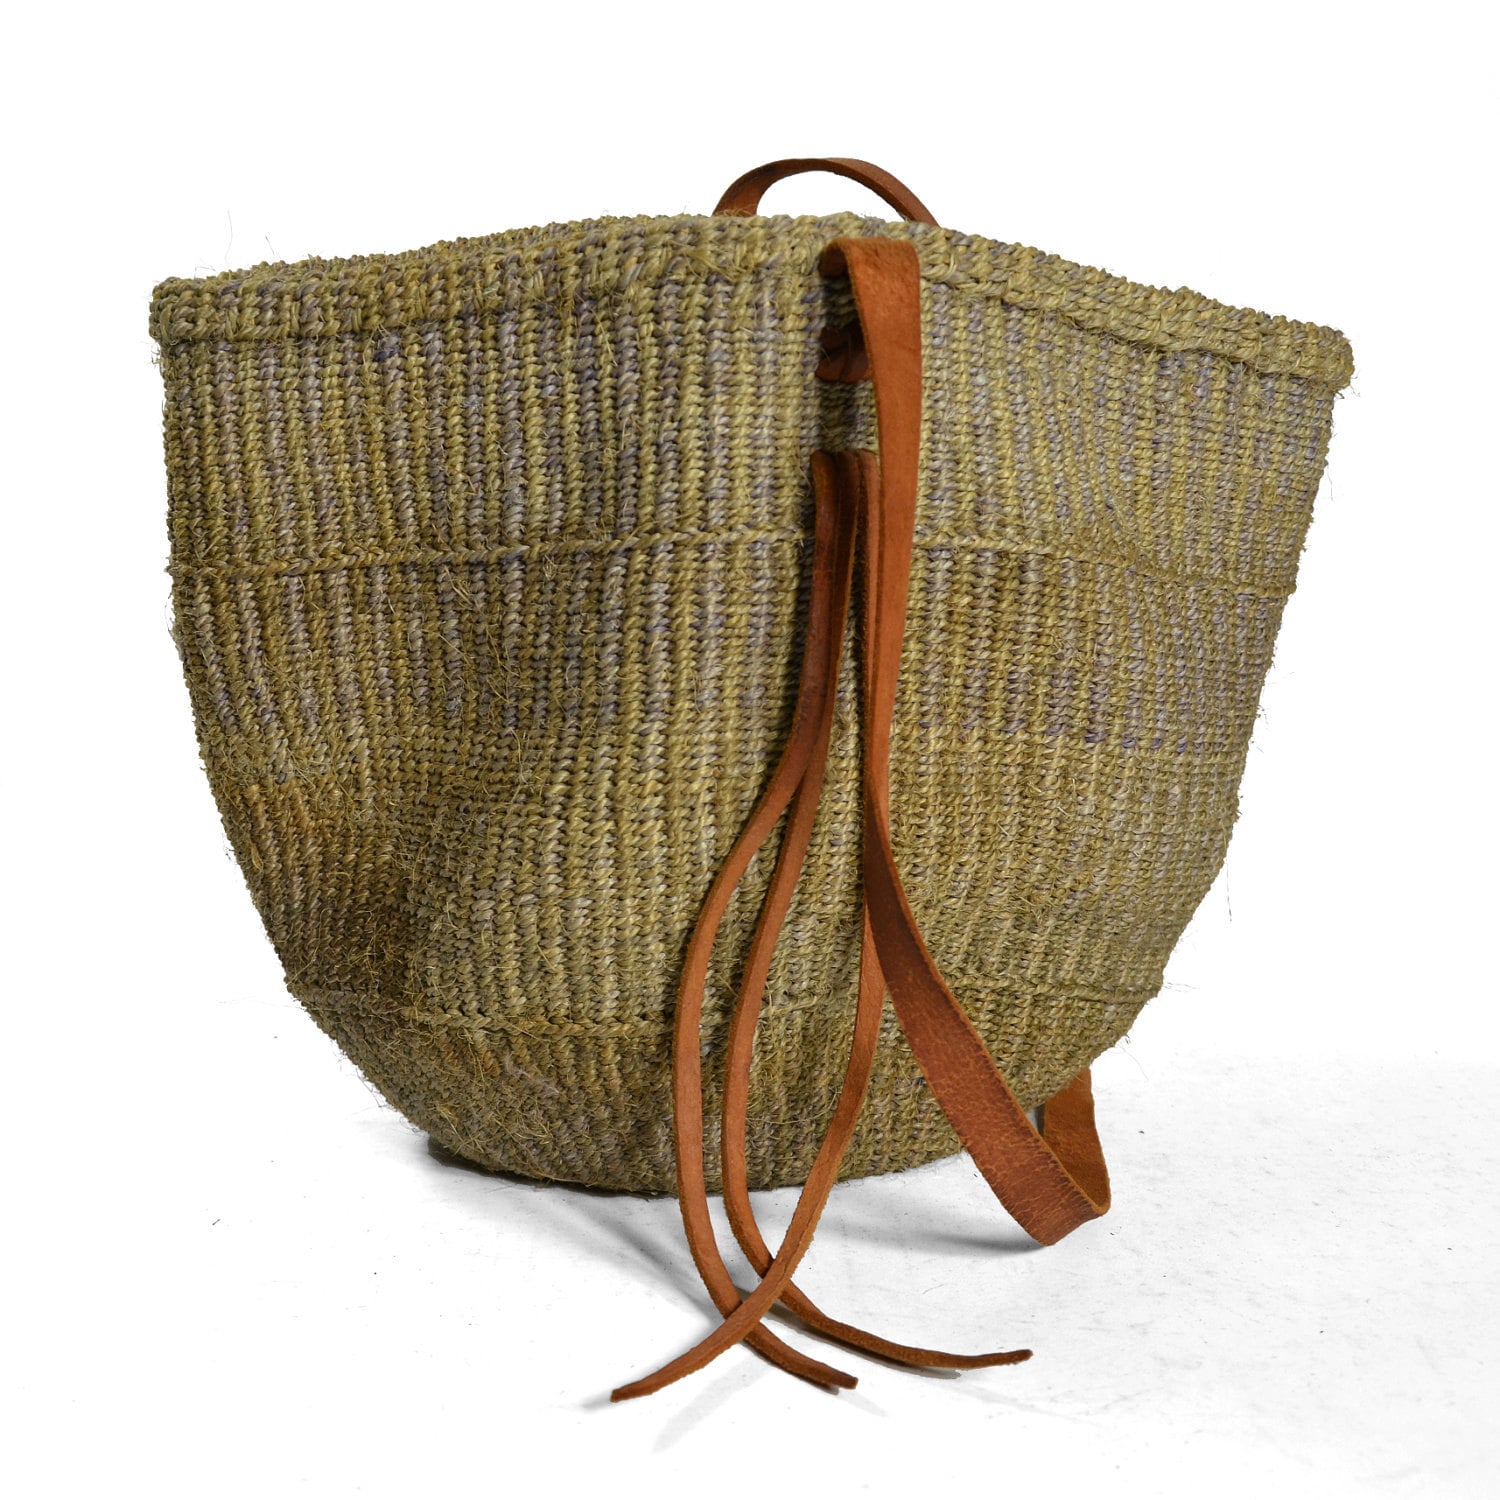 Large Sisal Bag / Woven Straw Purse with by wildrabbitvintage